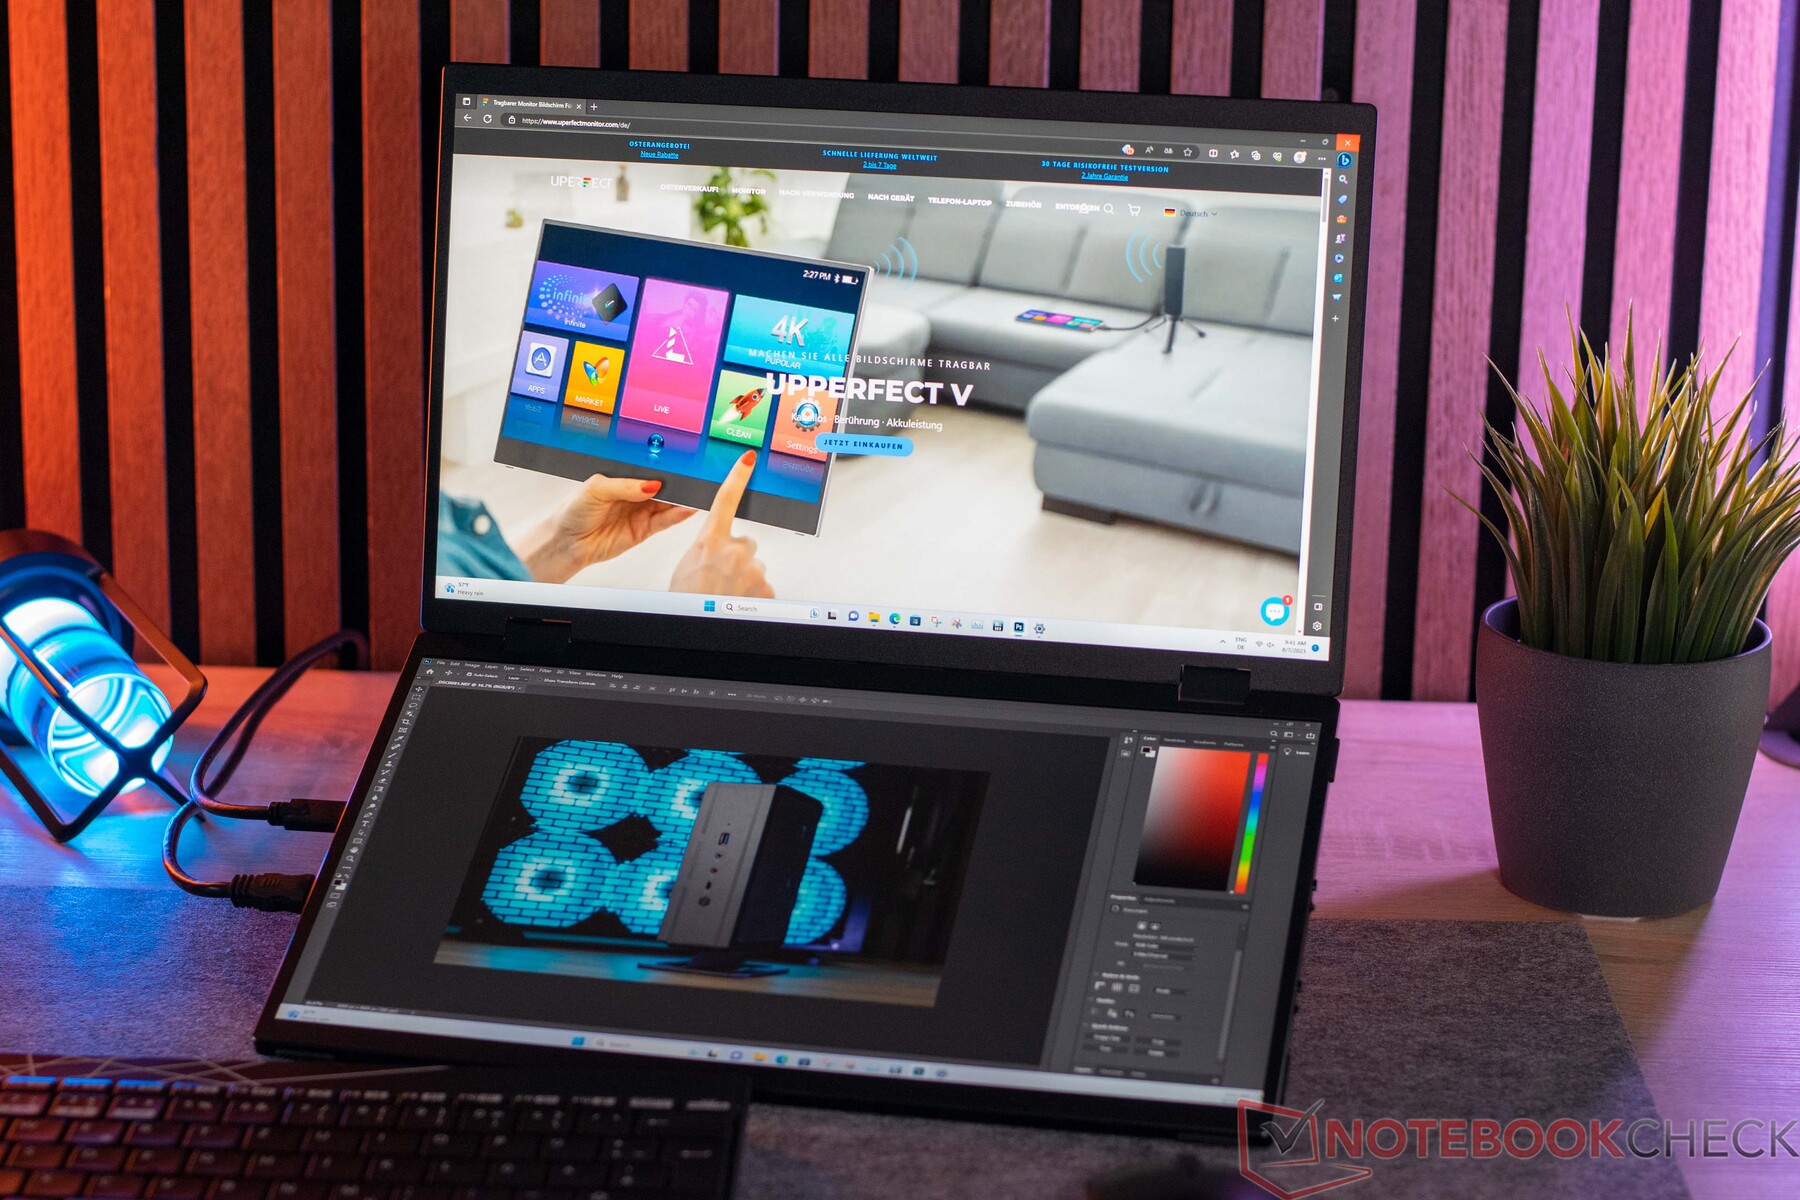 Uperfect UStation Delta review: Portable monitor with dual 15.6